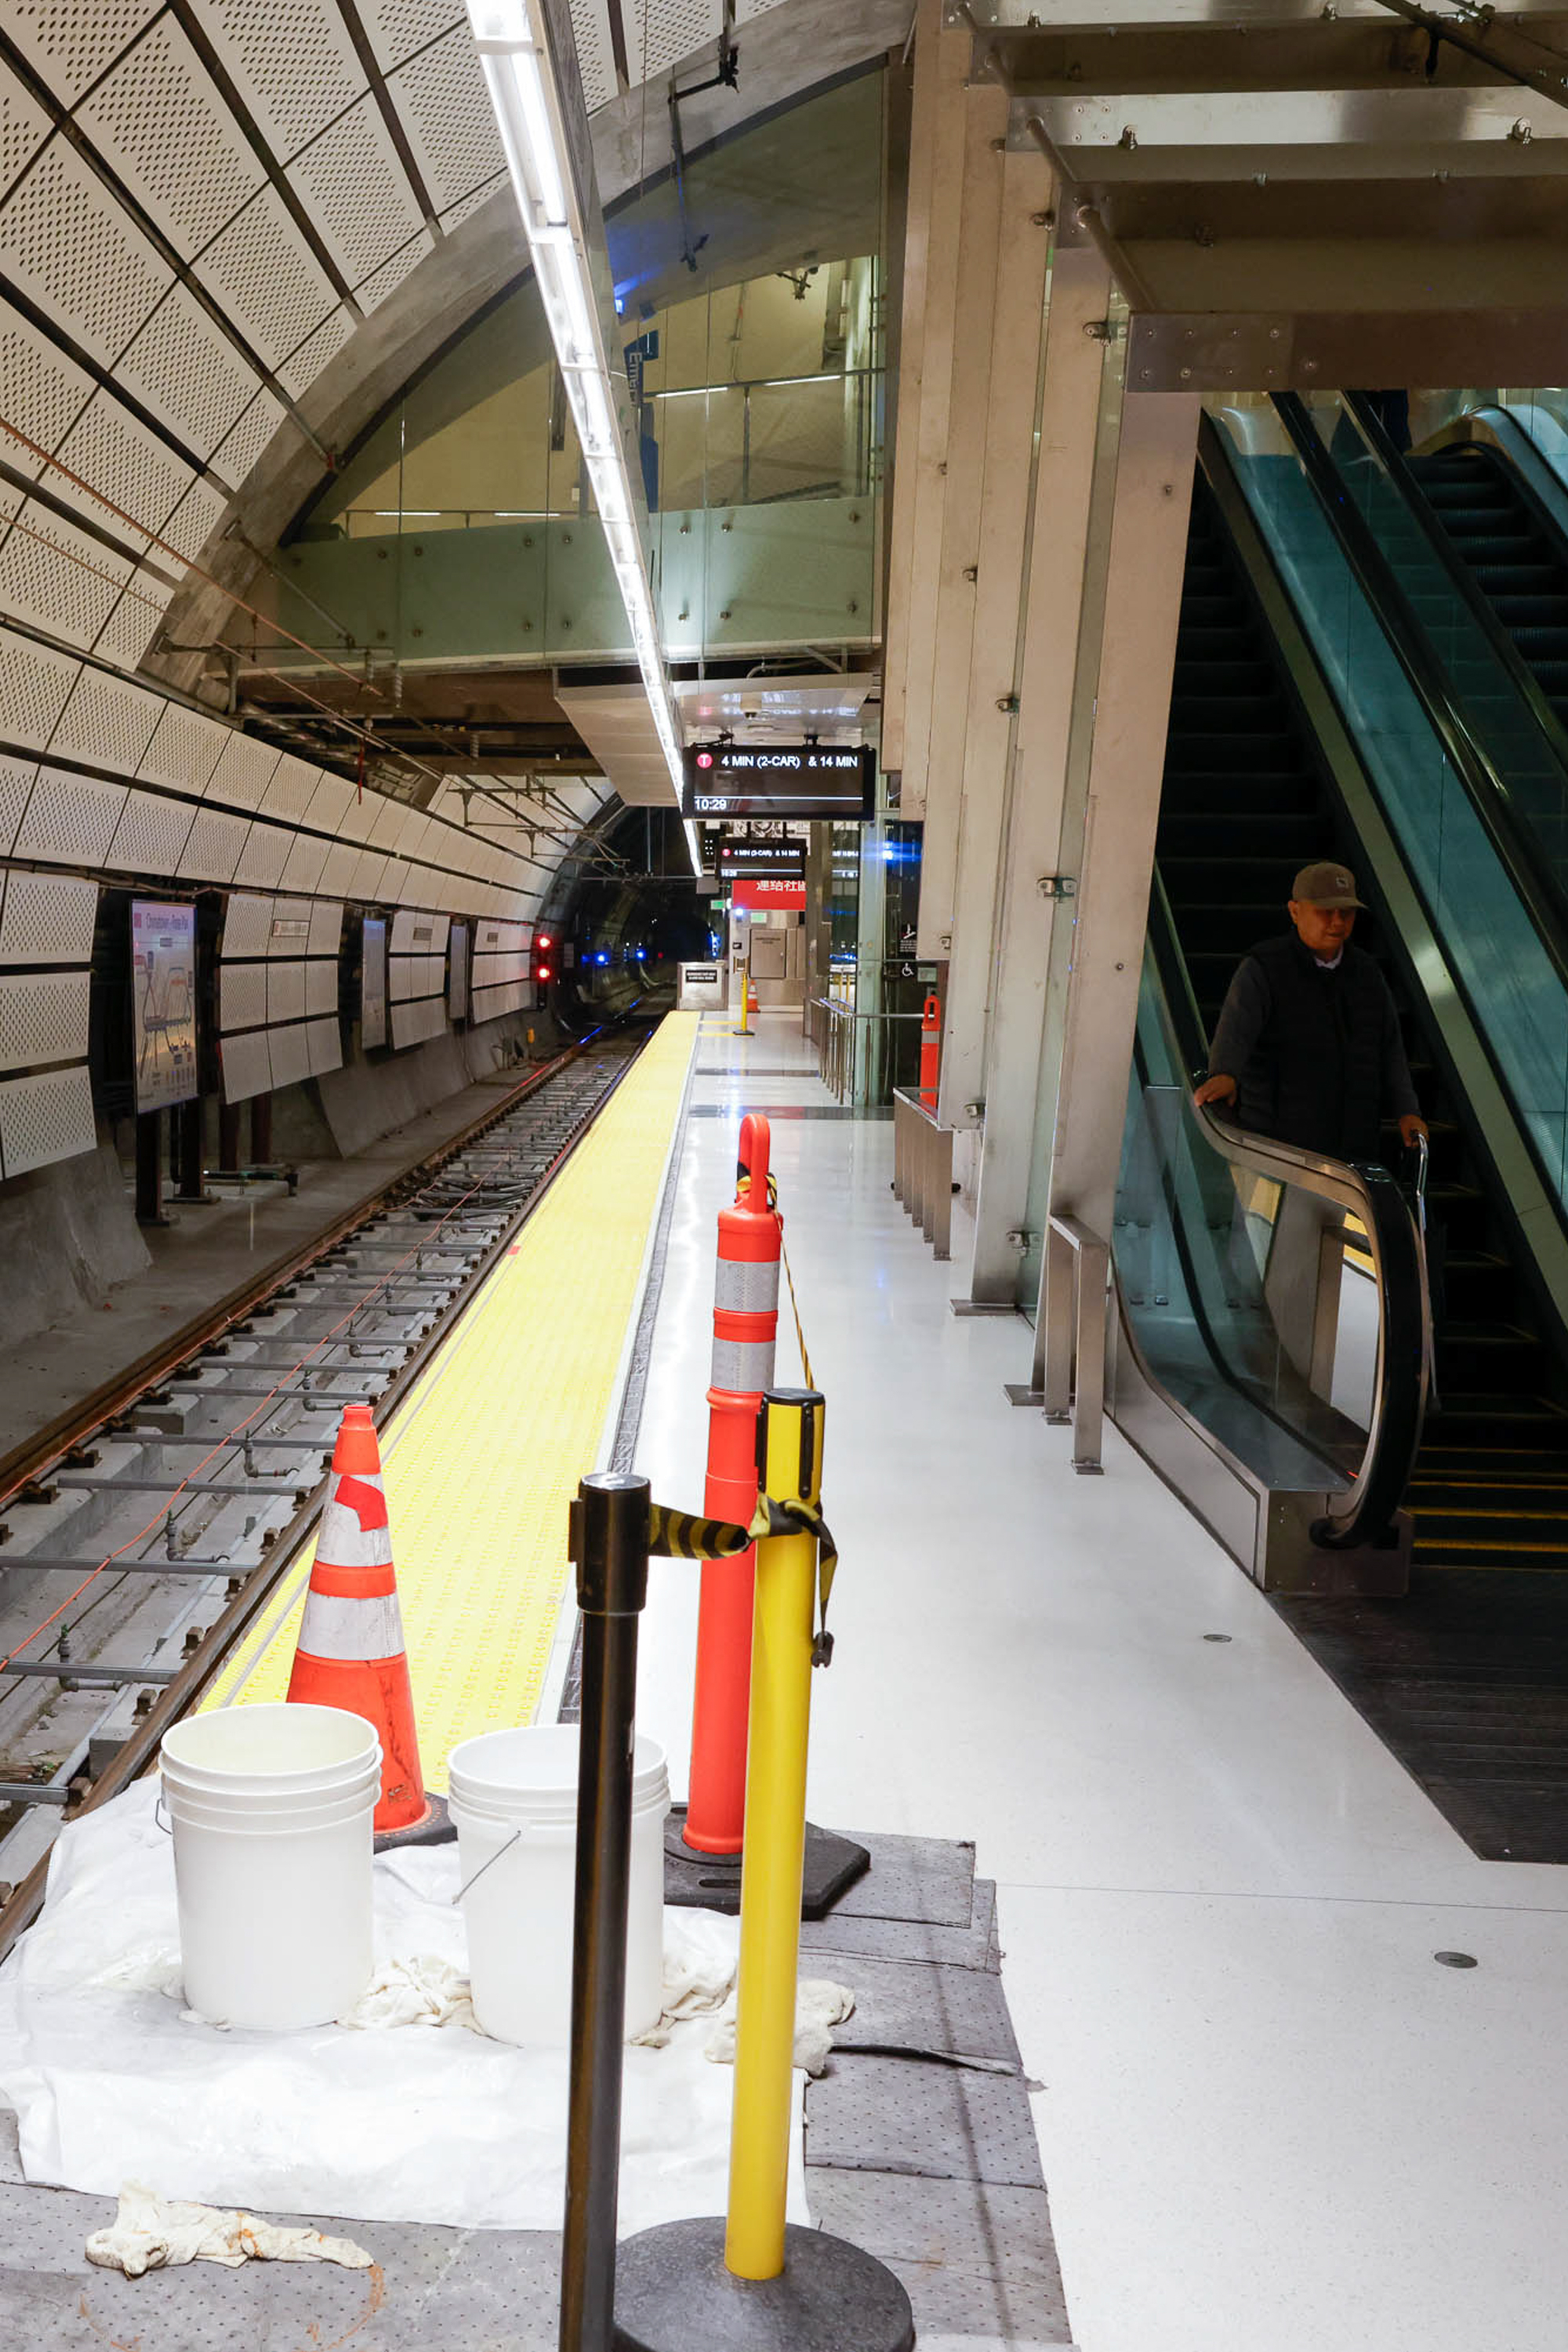 An empty subway station platform with a man riding an escalator, construction cones with buckets collecting dripping water.